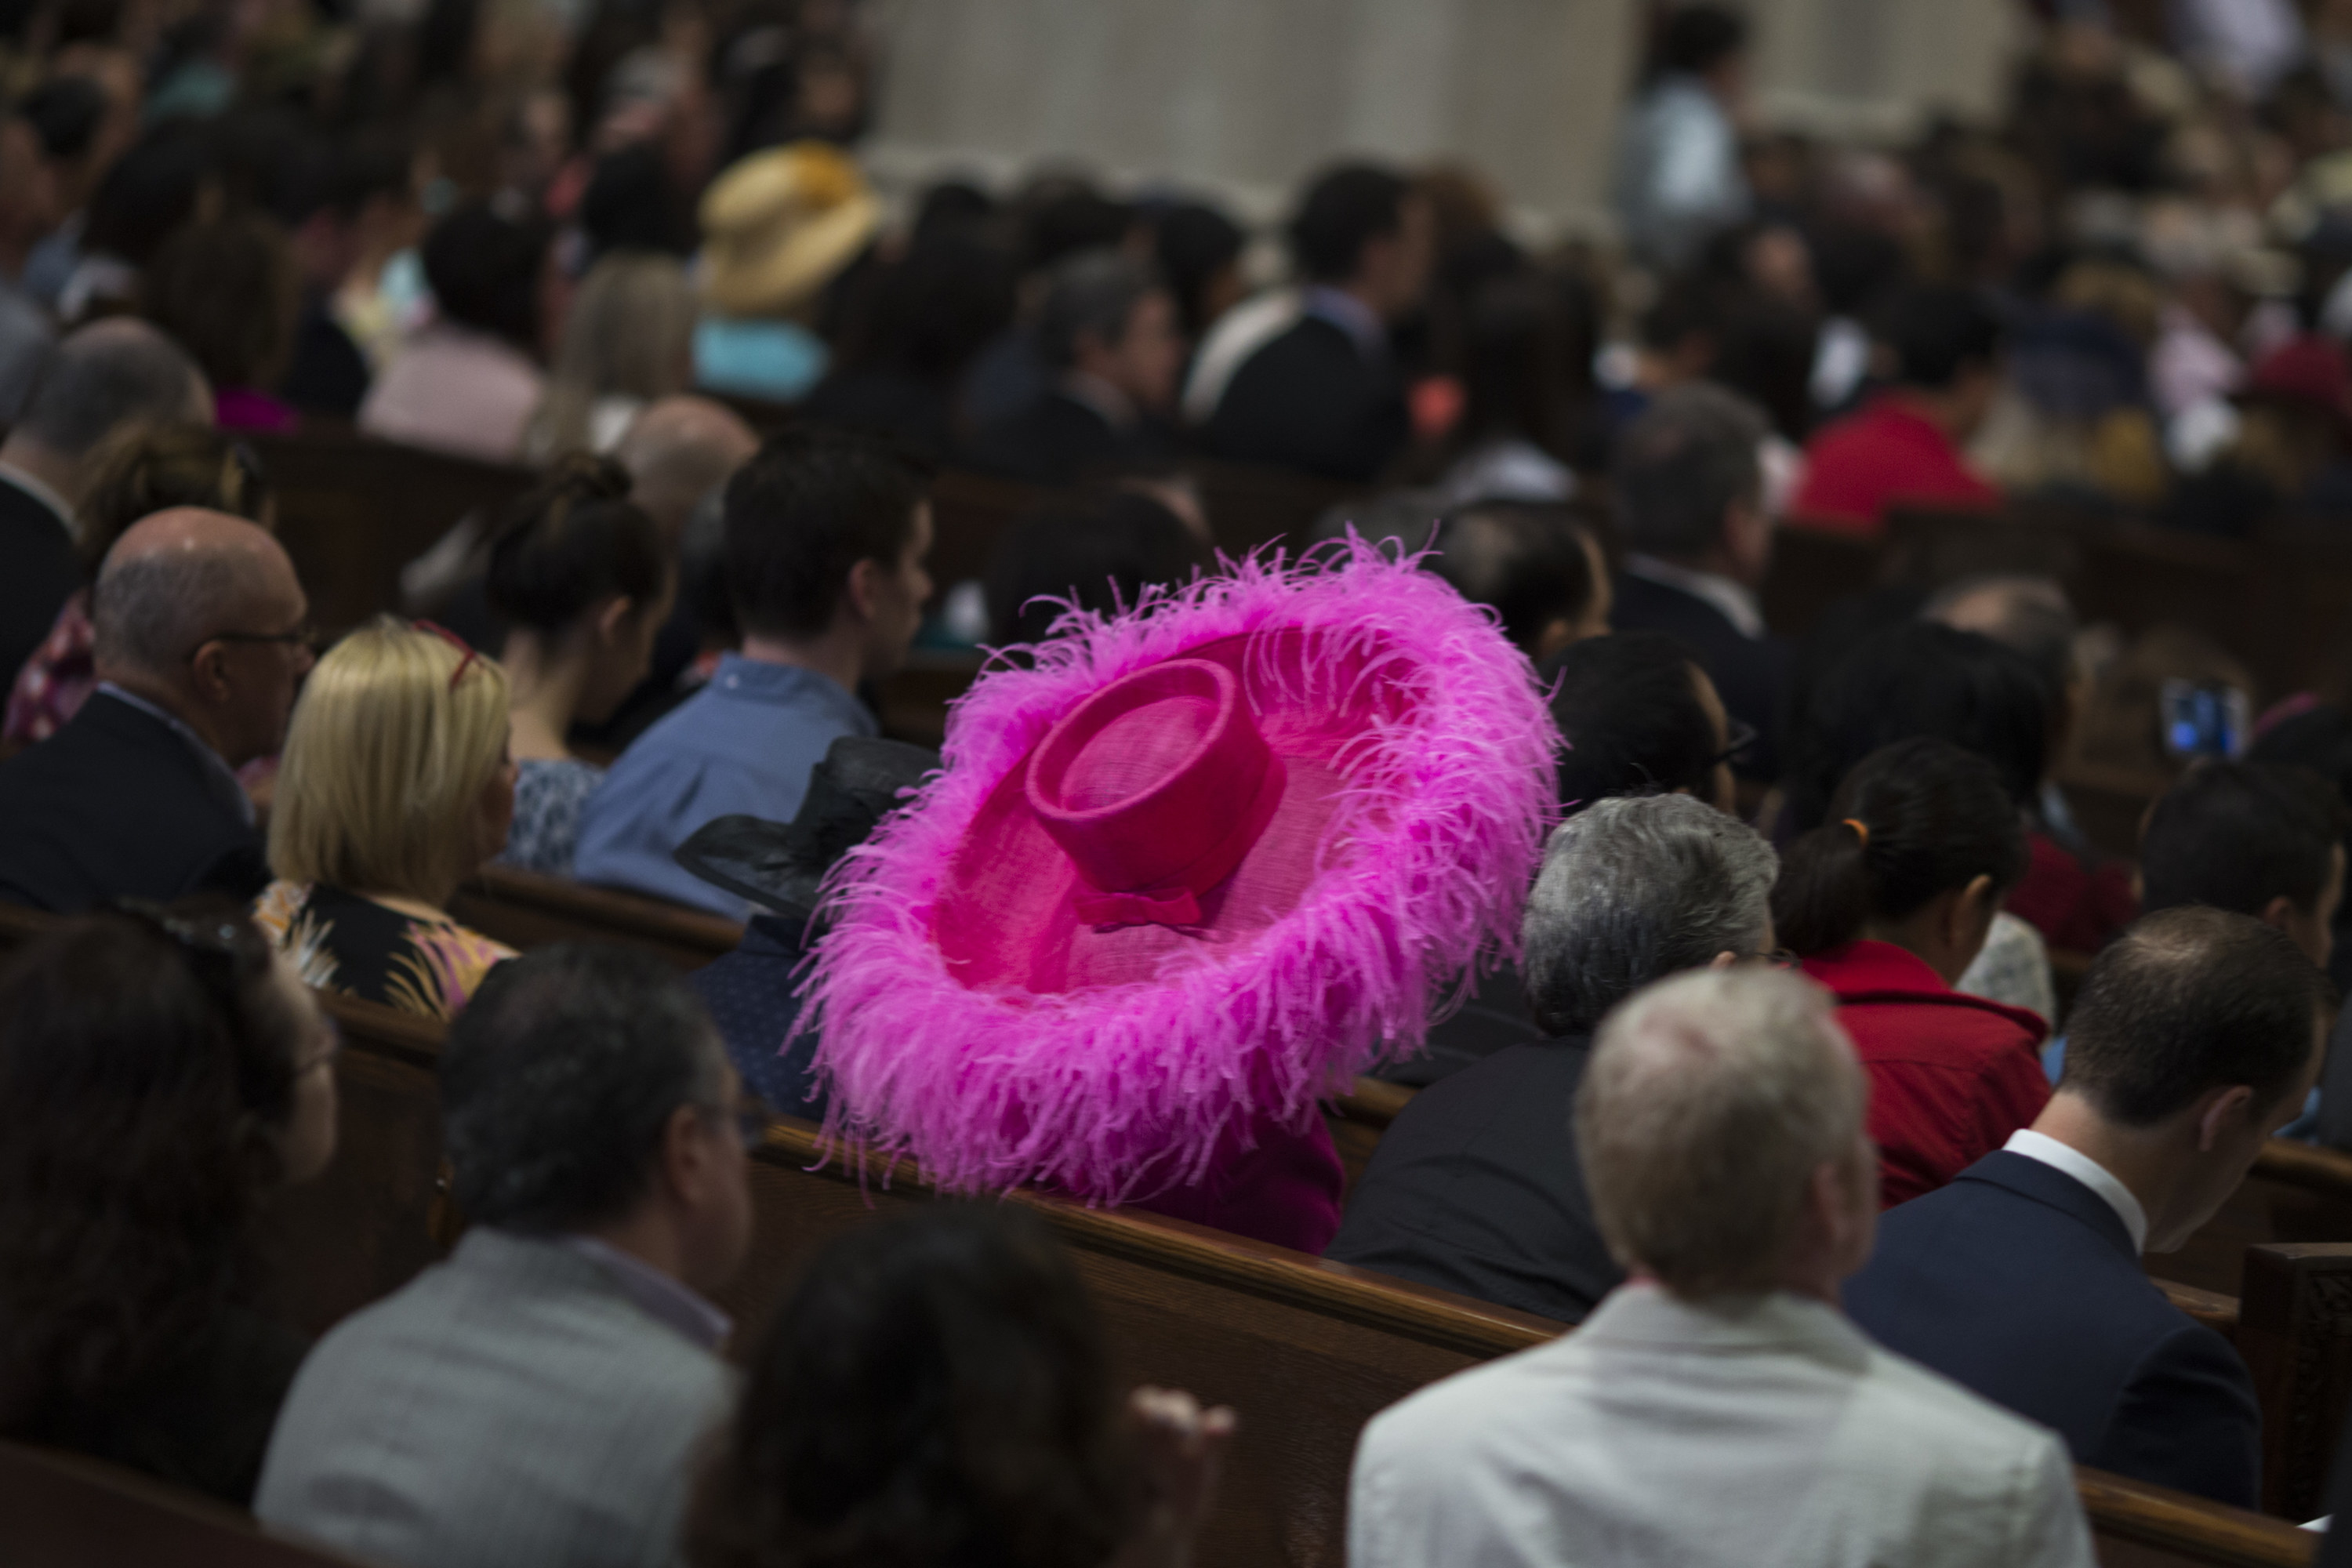 A giant pink hat with pink fringe in a crowd of churchgoers